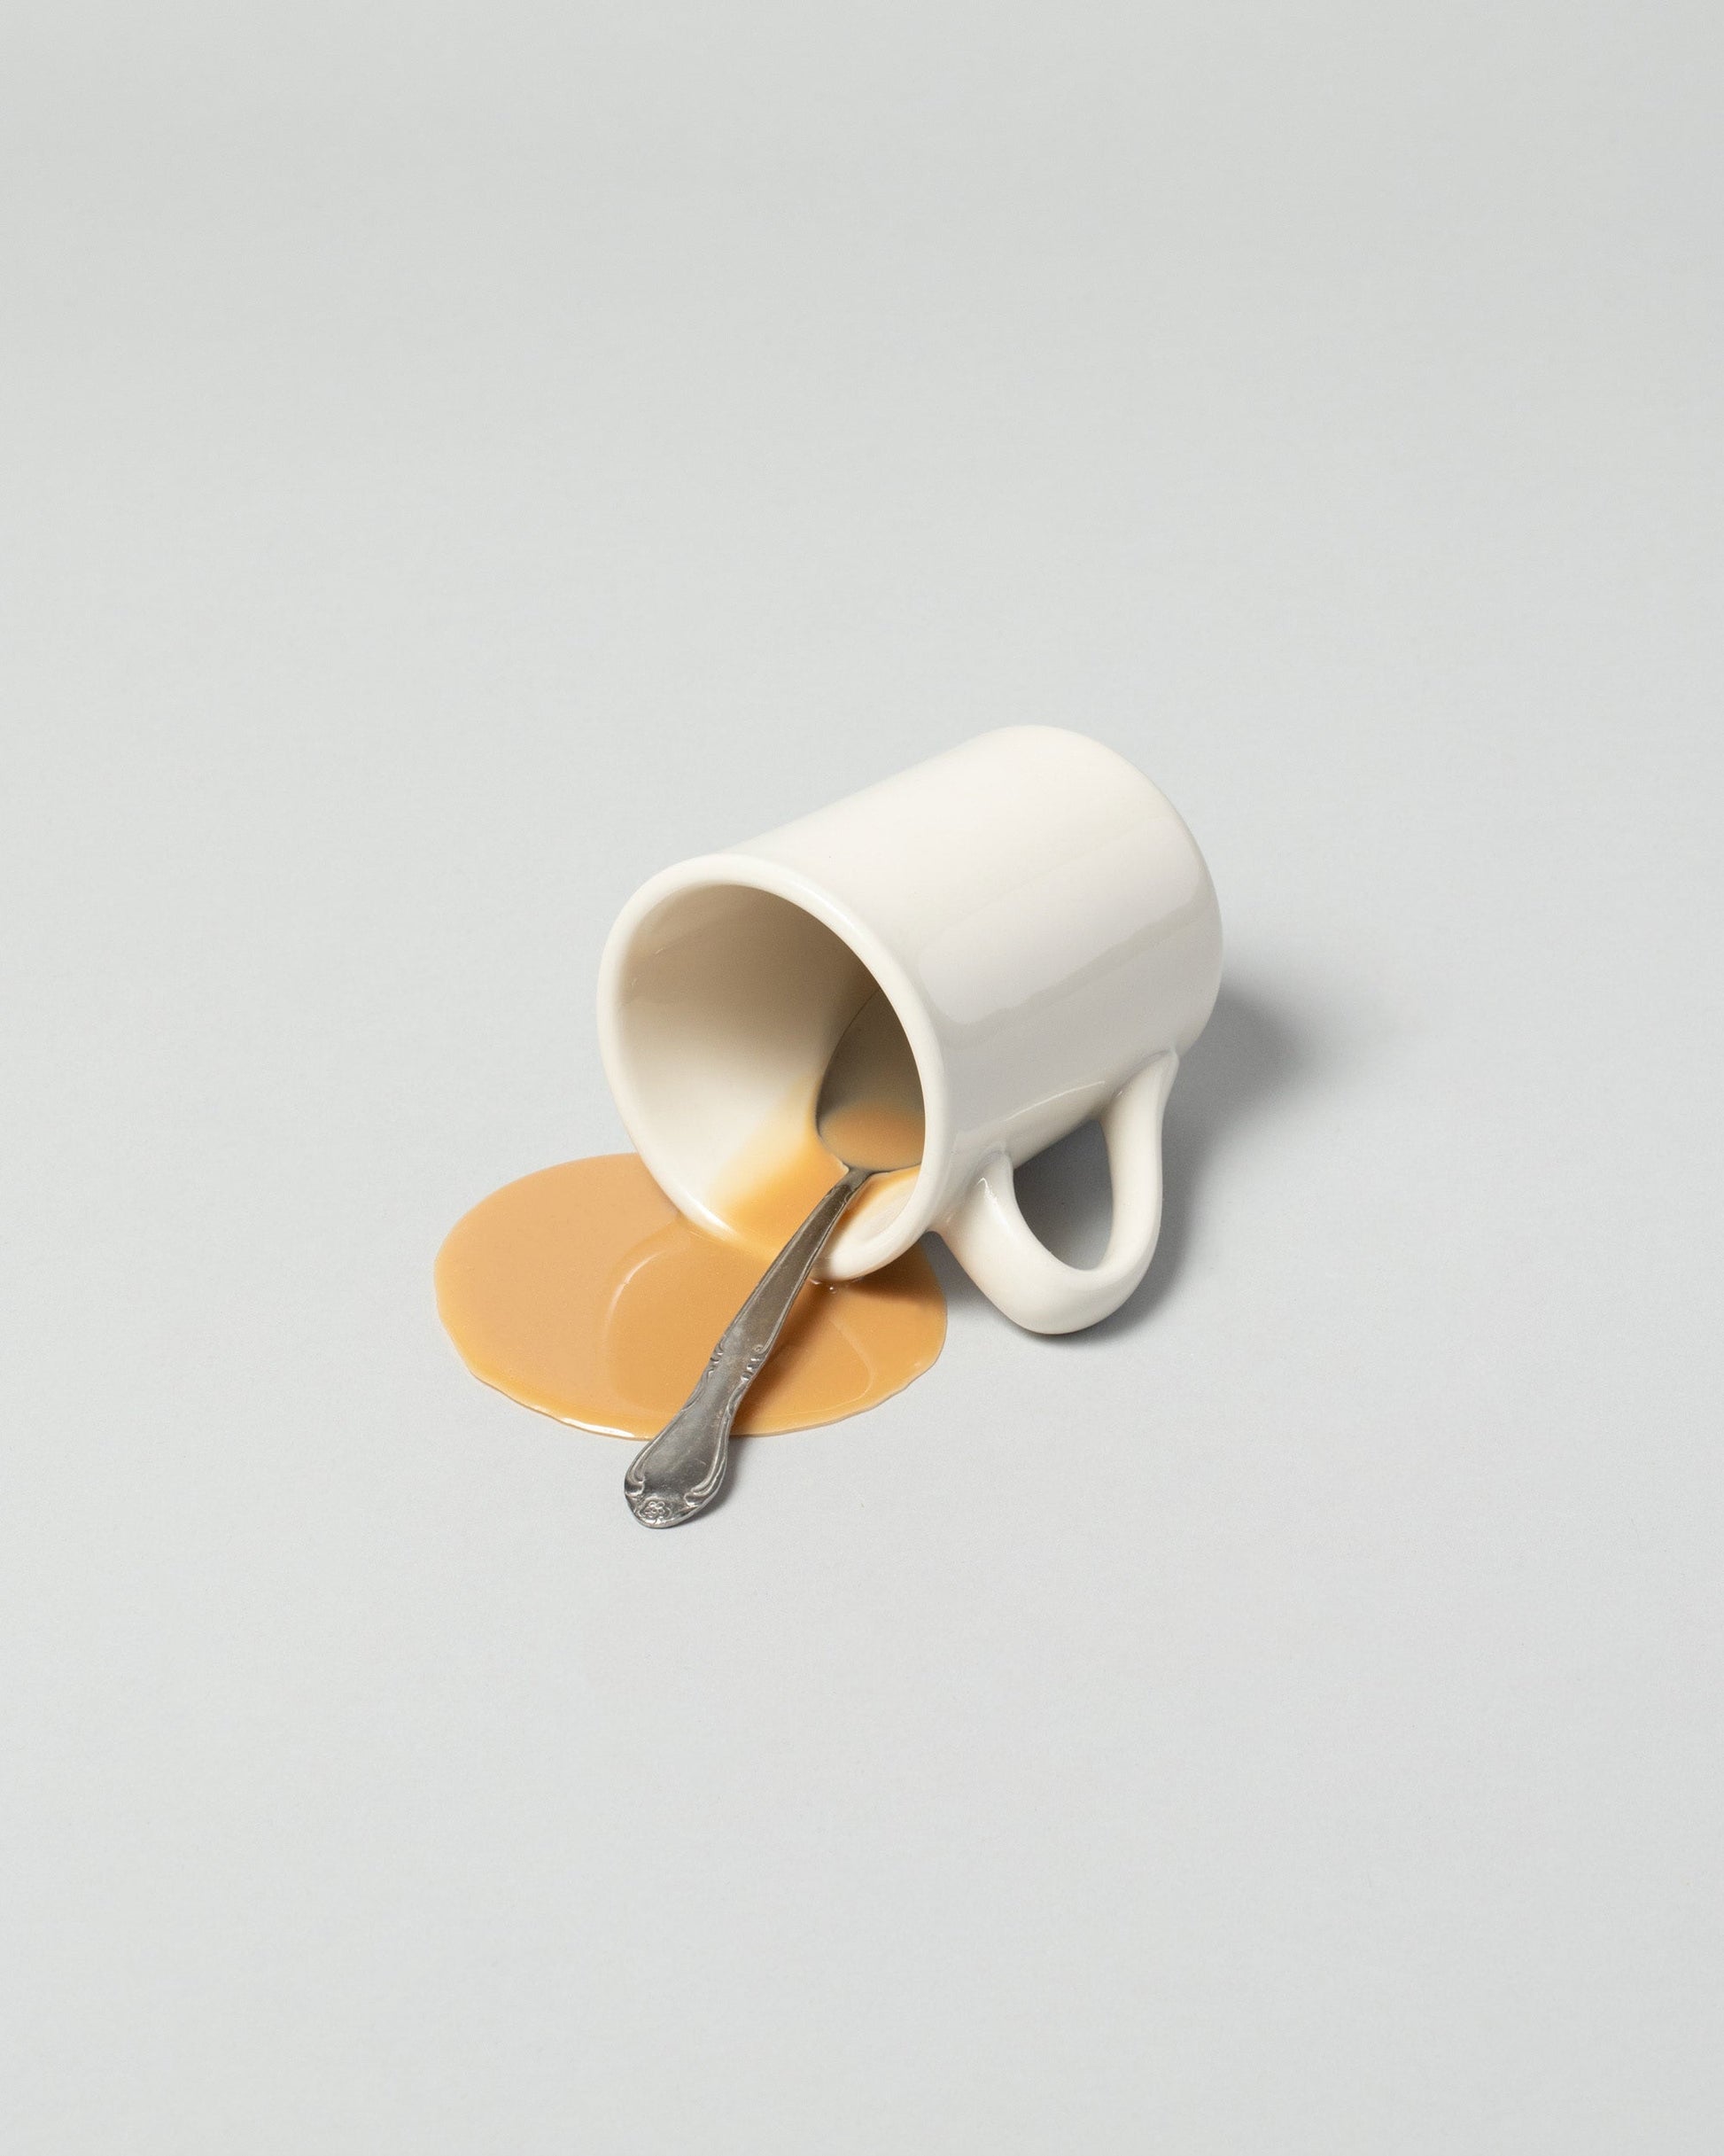 FAKE SPILLED COFFEE CUP